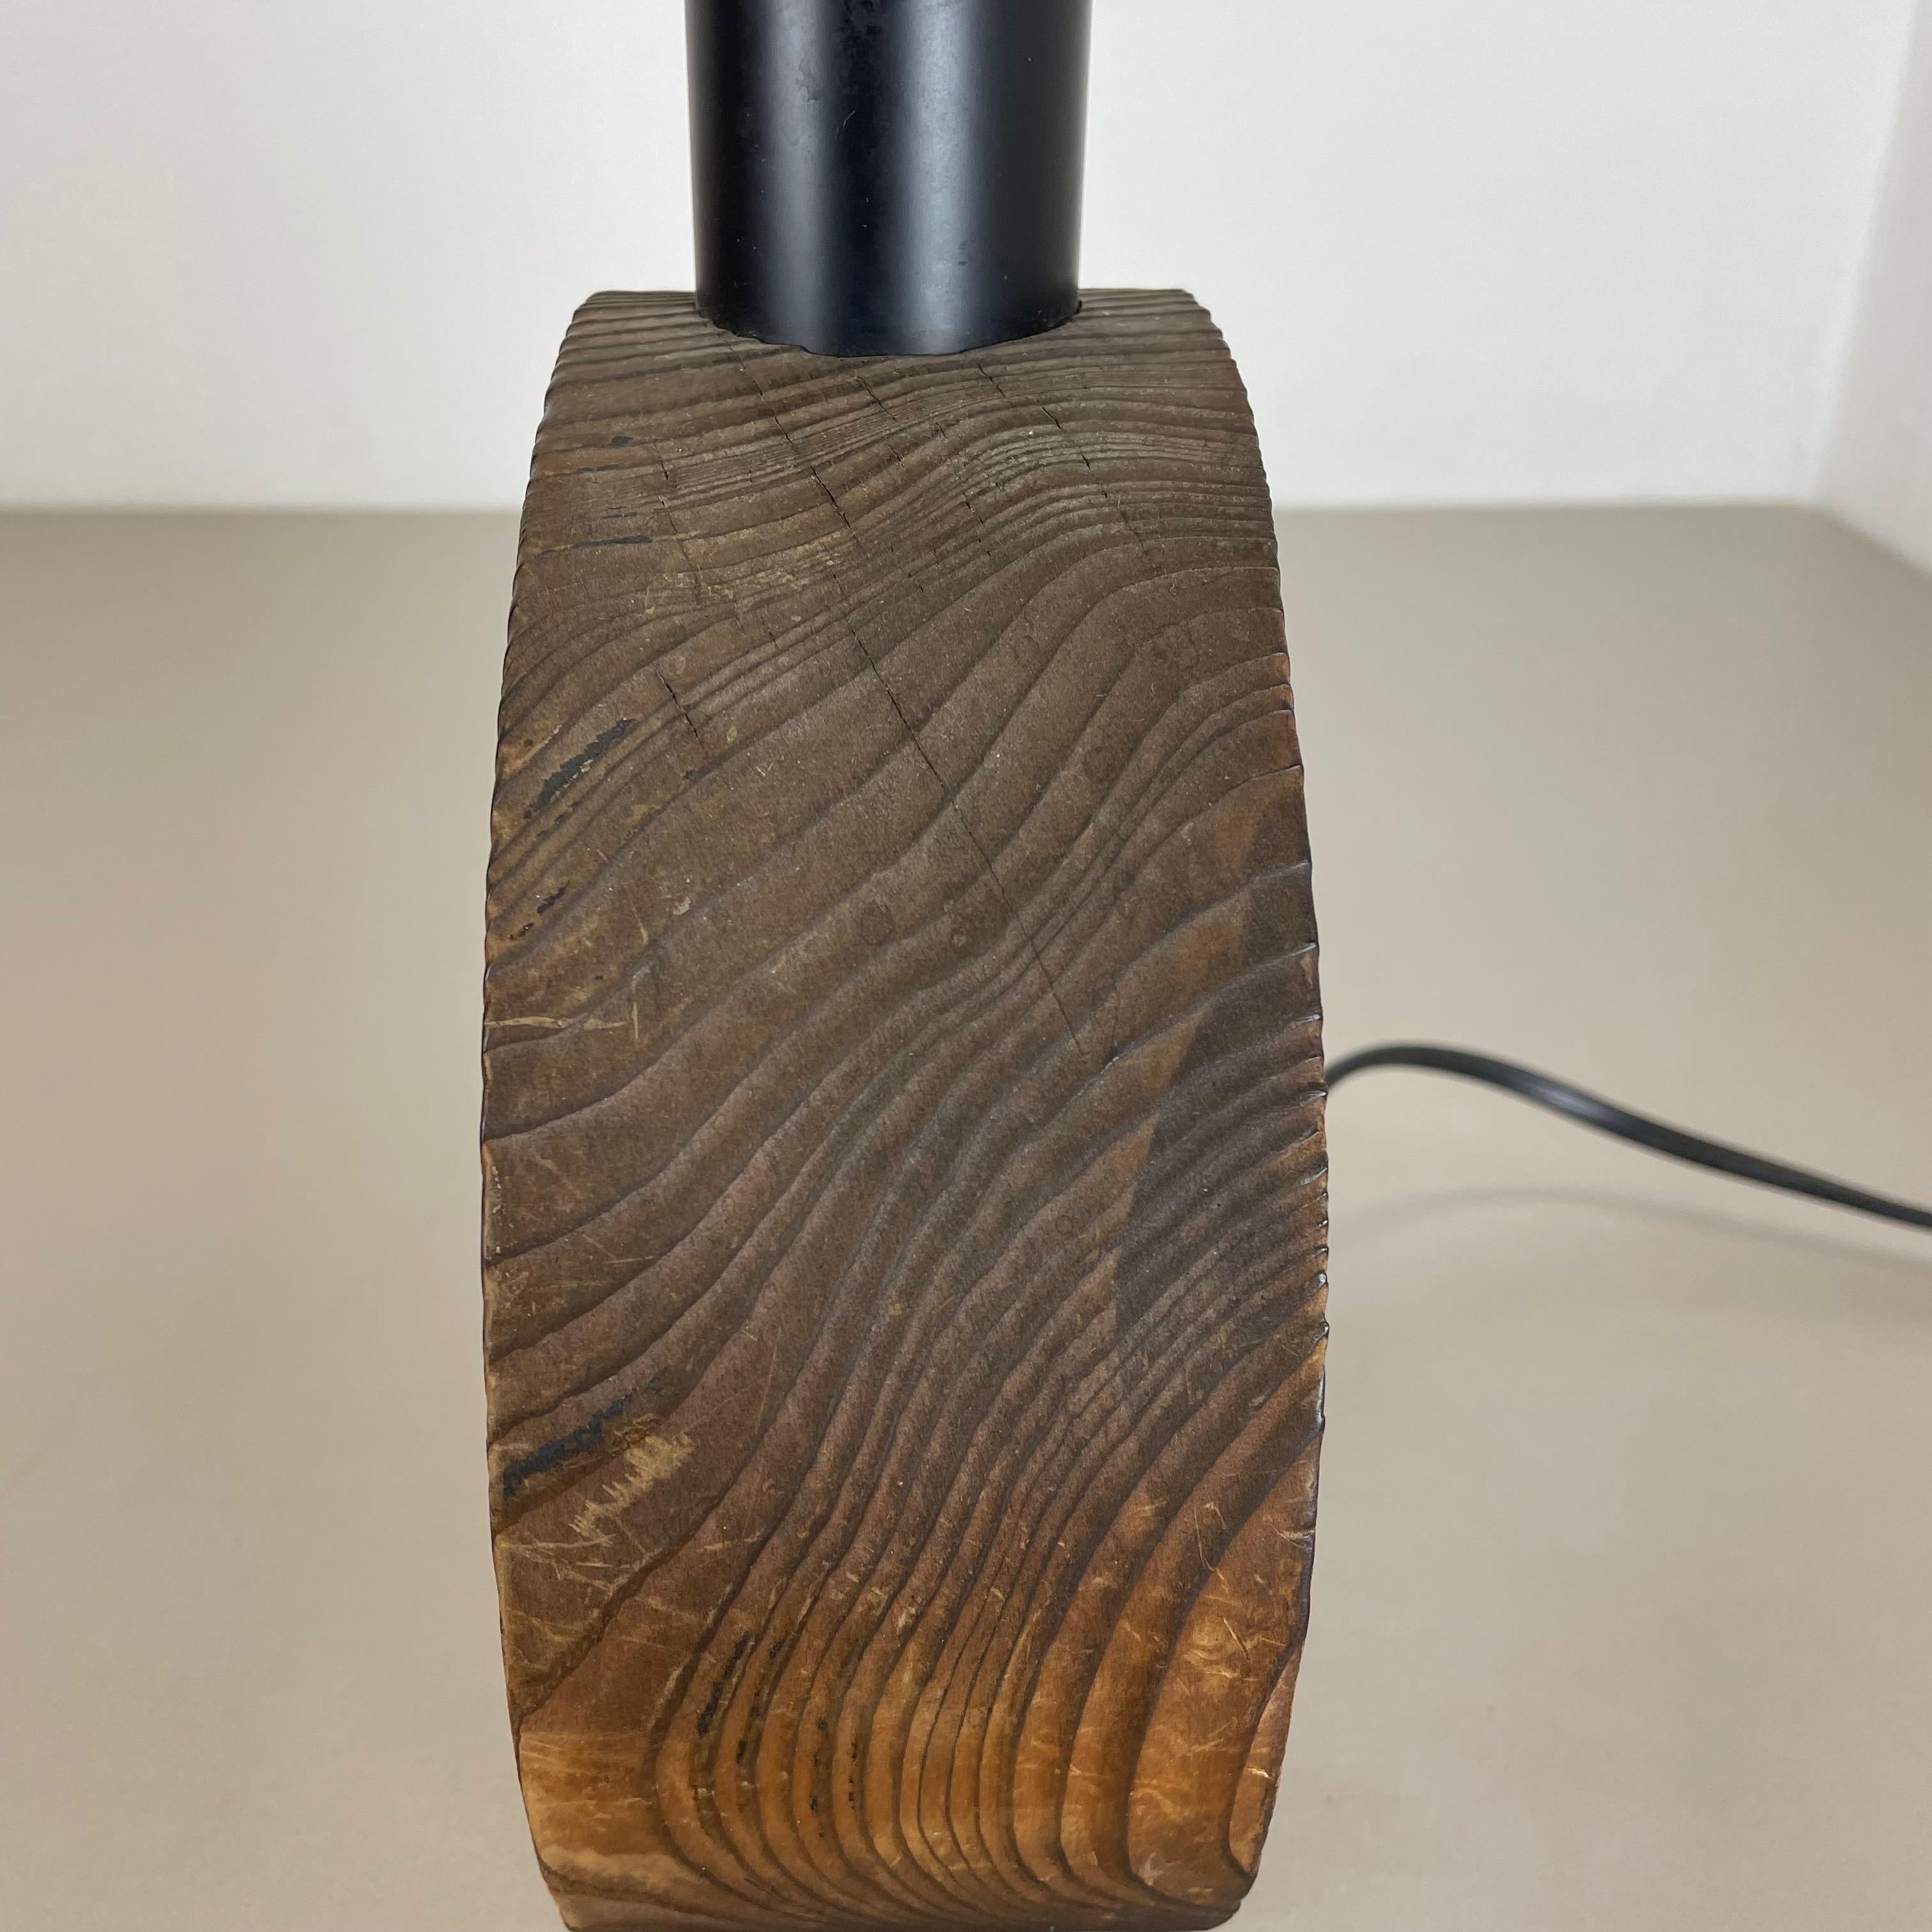 Organic Sculptural Wooden Table Light Made Temde Lights, Germany, 1970s For Sale 10